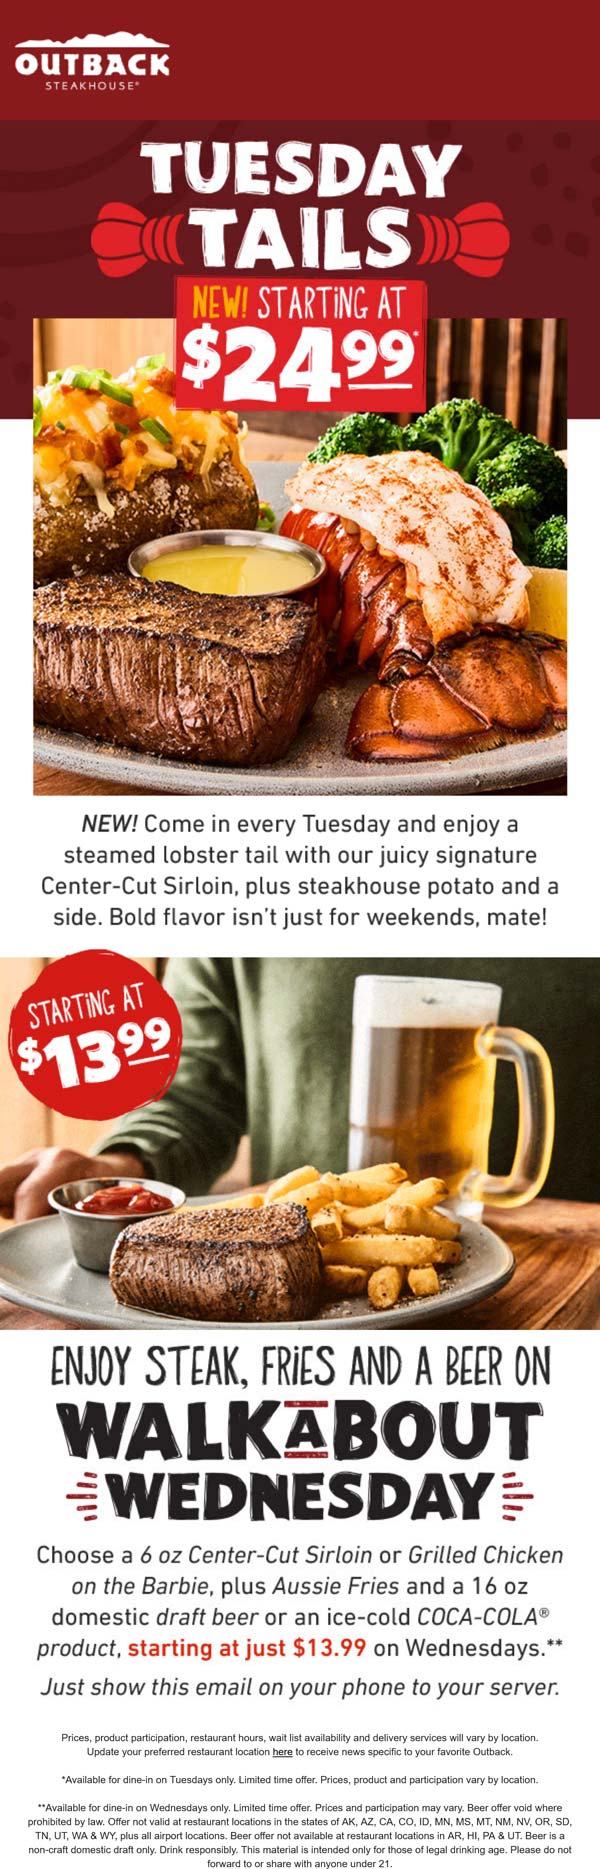 Outback Steakhouse restaurants Coupon  Sirloin + lobster tail + potato + side = $25 Tues at Outback Steakhouse, also steak + fries + beer = $14 Wed #outbacksteakhouse 